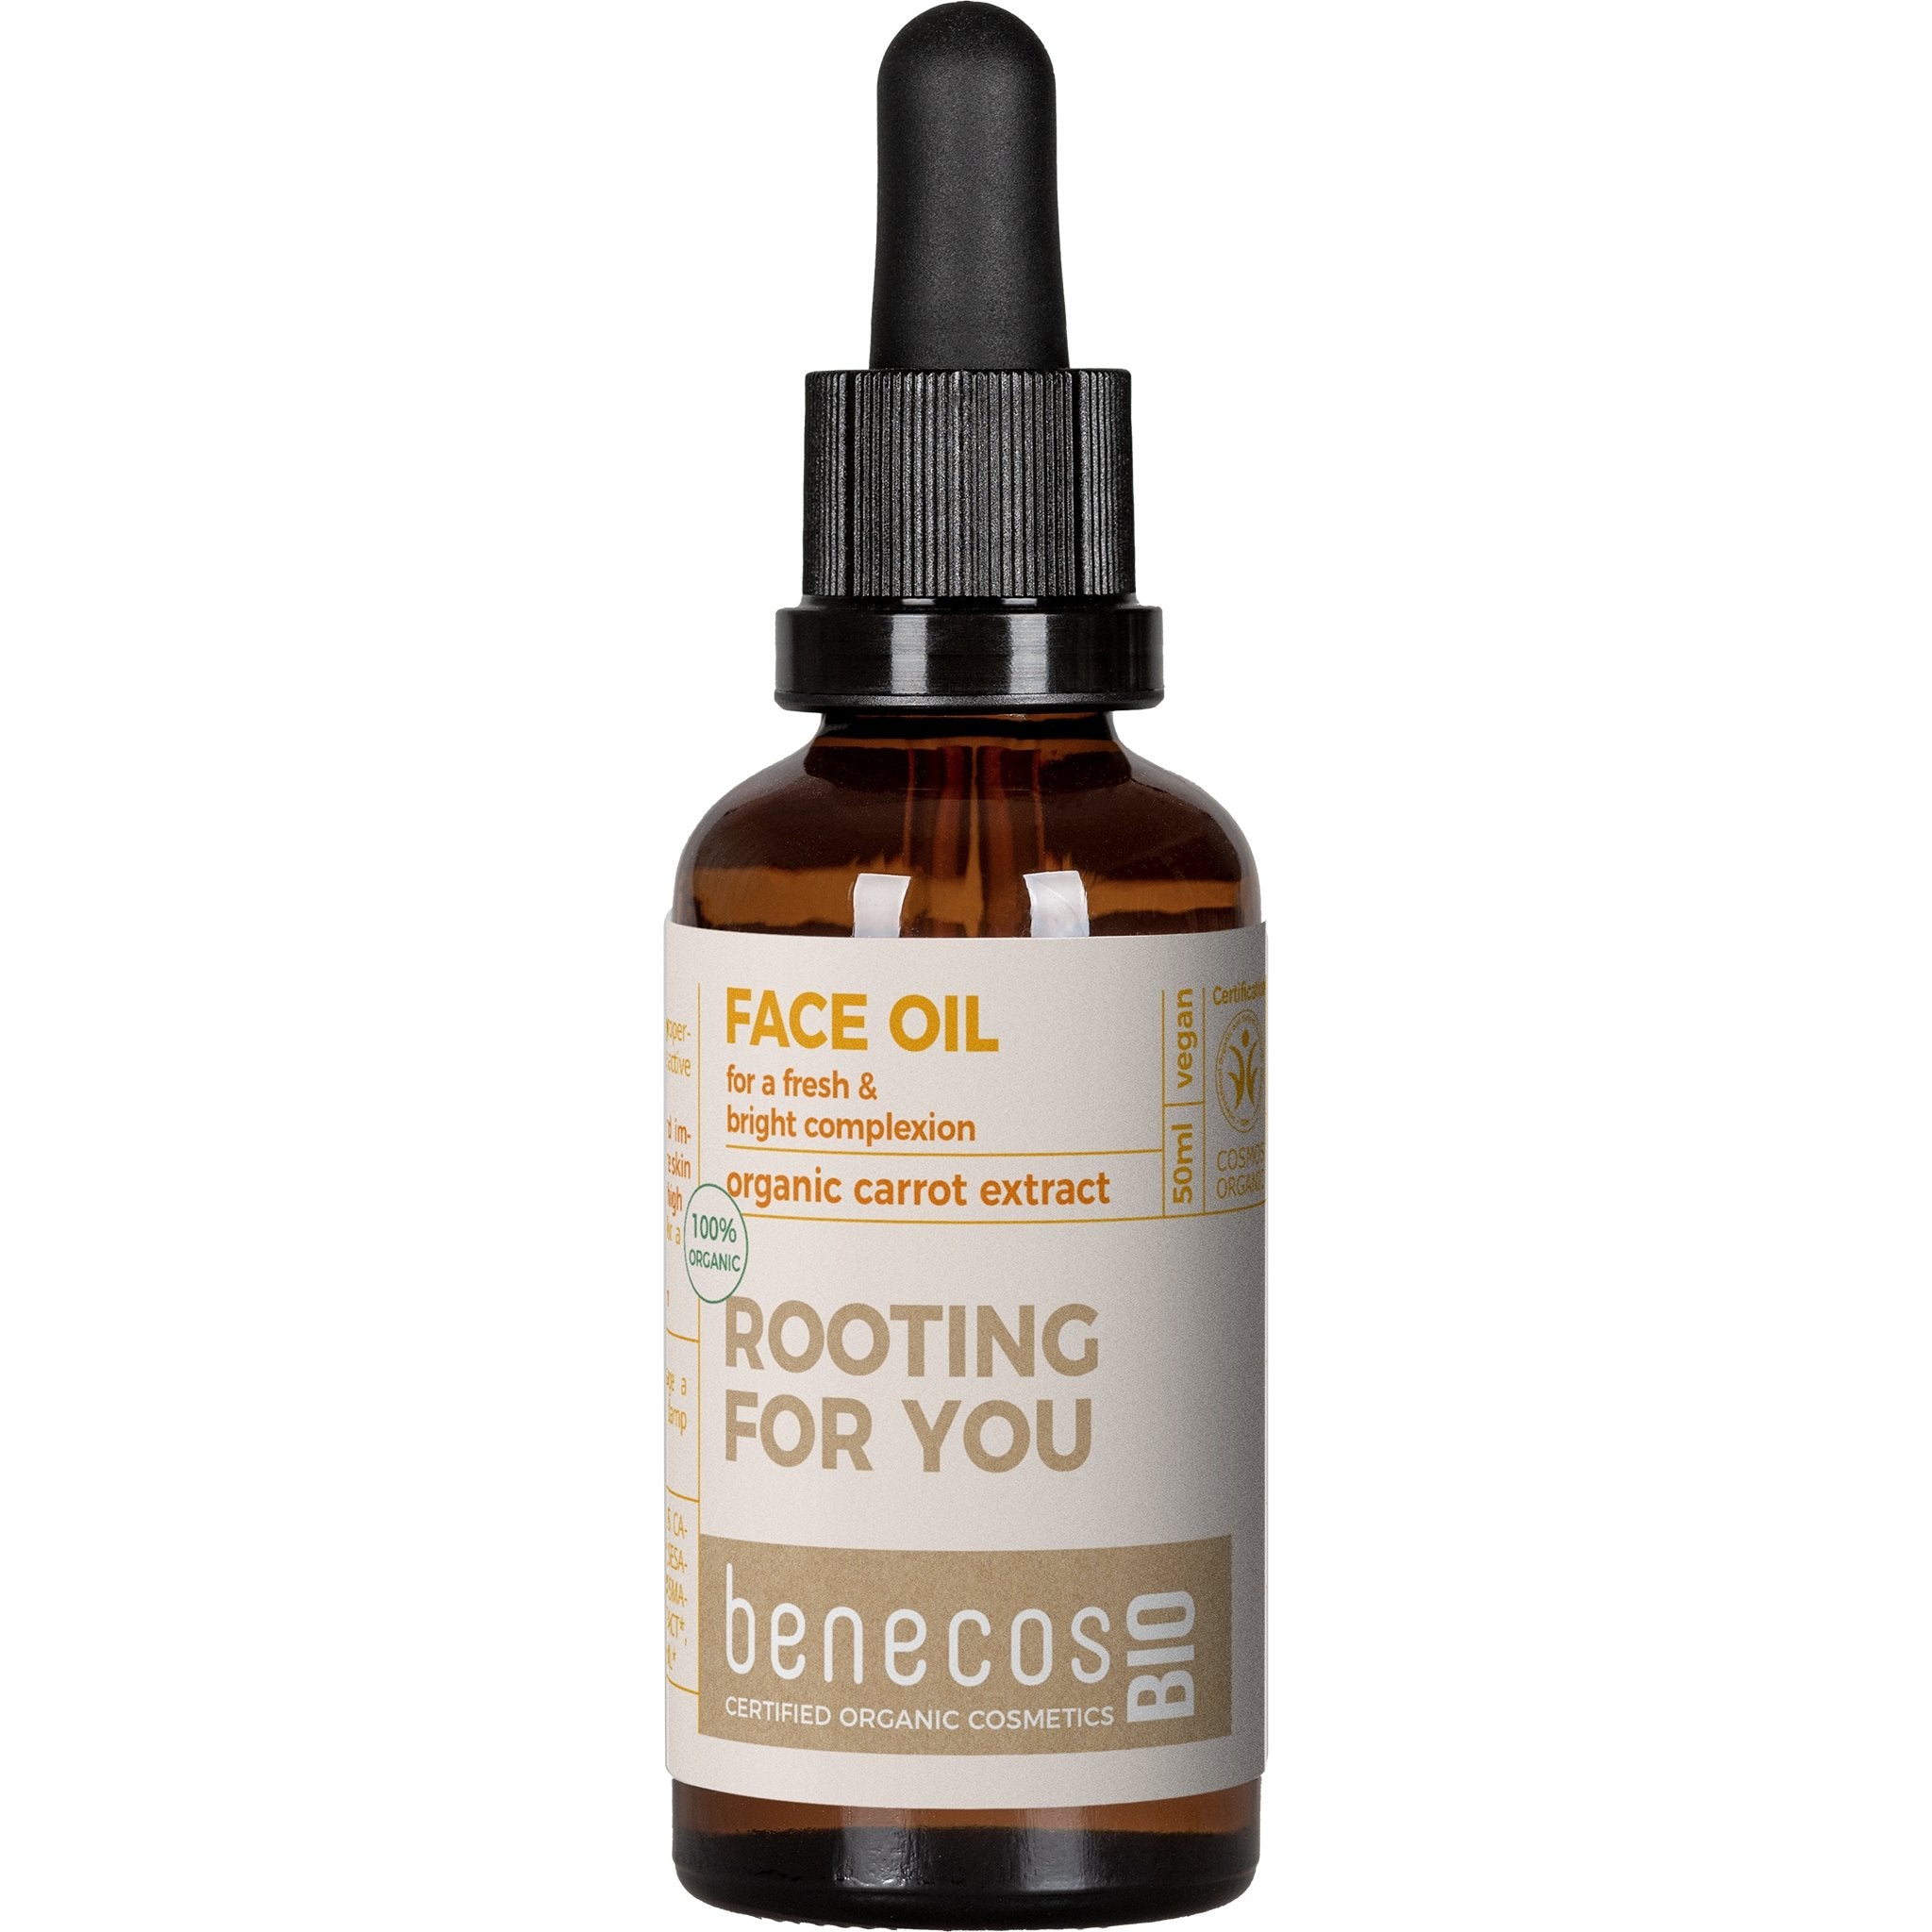 Rooting For You - Organic Carrot Extract Face Oil - mypure.co.uk